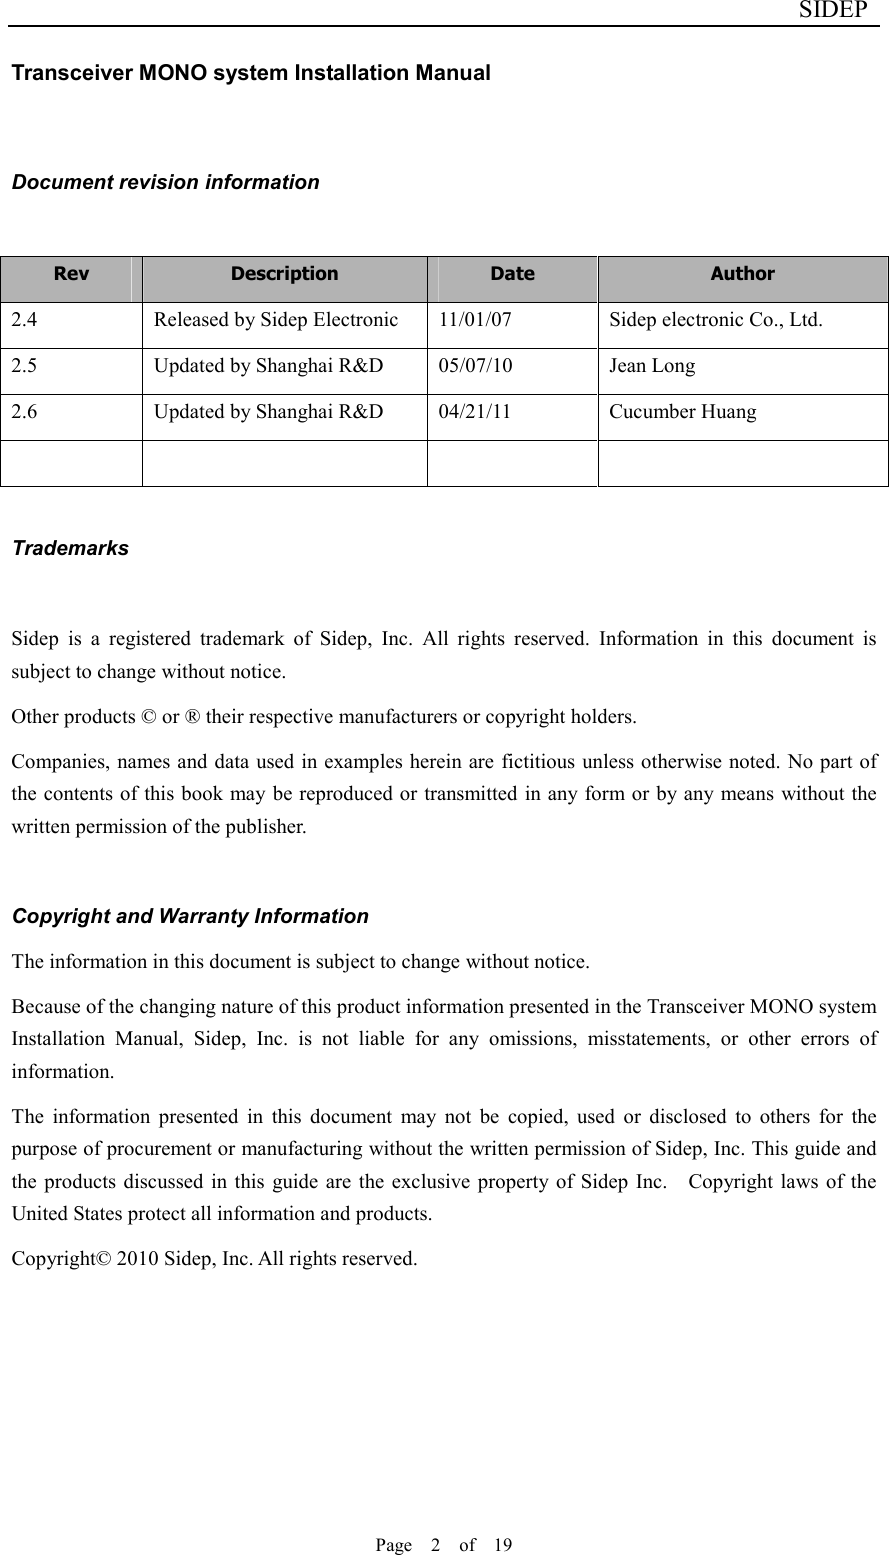                              SIDEP Page    2    of    19   Transceiver MONO system Installation Manual   Document revision information  Rev  Description  Date  Author 2.4  Released by Sidep Electronic  11/01/07  Sidep electronic Co., Ltd. 2.5  Updated by Shanghai R&amp;D  05/07/10  Jean Long 2.6  Updated by Shanghai R&amp;D  04/21/11  Cucumber Huang         Trademarks  Sidep  is  a  registered  trademark  of  Sidep,  Inc.  All  rights  reserved.  Information  in  this  document  is subject to change without notice. Other products © or ® their respective manufacturers or copyright holders. Companies, names and data used in examples herein are fictitious unless otherwise noted. No part of the contents of this book may be reproduced or transmitted in any form or by any means without the written permission of the publisher.  Copyright and Warranty Information The information in this document is subject to change without notice. Because of the changing nature of this product information presented in the Transceiver MONO system Installation  Manual,  Sidep,  Inc.  is  not  liable  for  any  omissions,  misstatements,  or  other  errors  of information. The  information  presented  in  this  document  may  not  be  copied,  used  or  disclosed  to  others  for  the purpose of procurement or manufacturing without the written permission of Sidep, Inc. This guide and the products discussed  in  this  guide  are the exclusive  property of Sidep  Inc.    Copyright  laws of the United States protect all information and products. Copyright© 2010 Sidep, Inc. All rights reserved.      